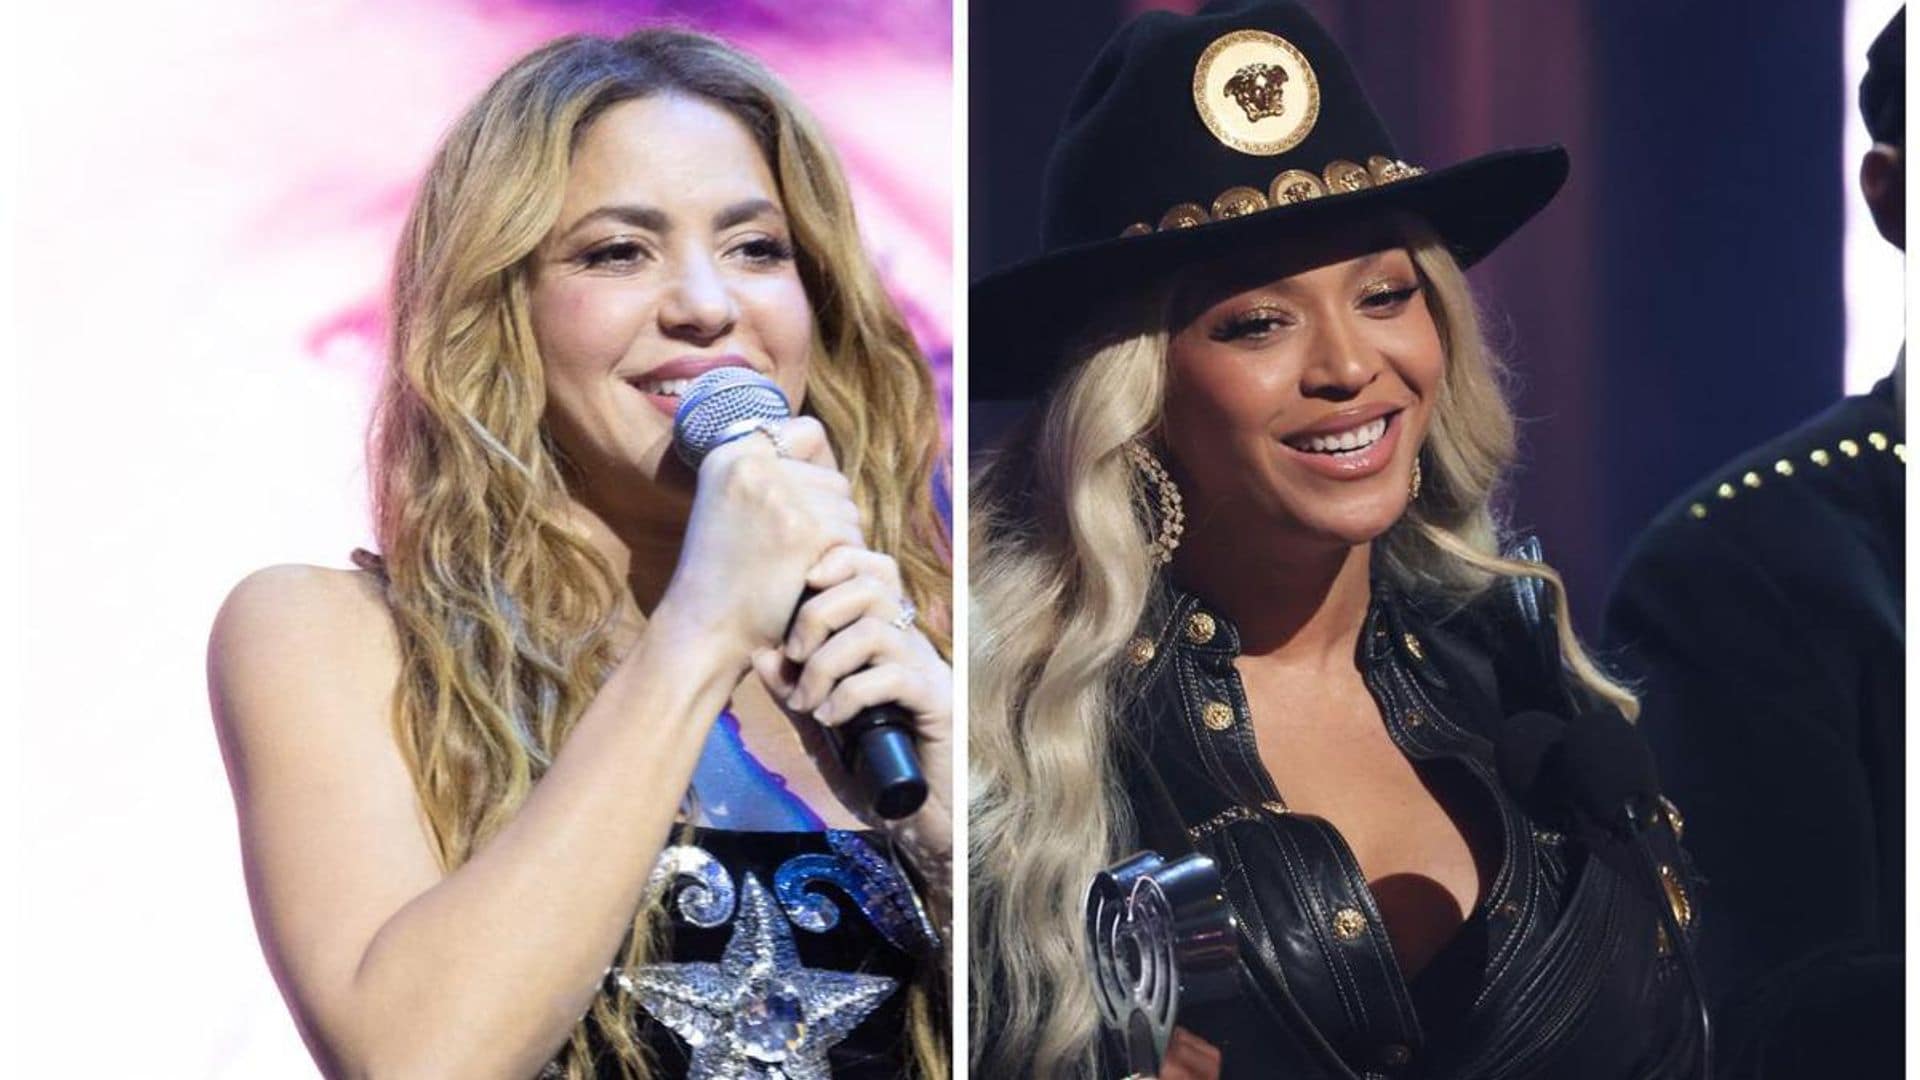 Shakira revealed Beyoncé wanted to learn some of her dance moves after working together: ‘She’s just so incredible’